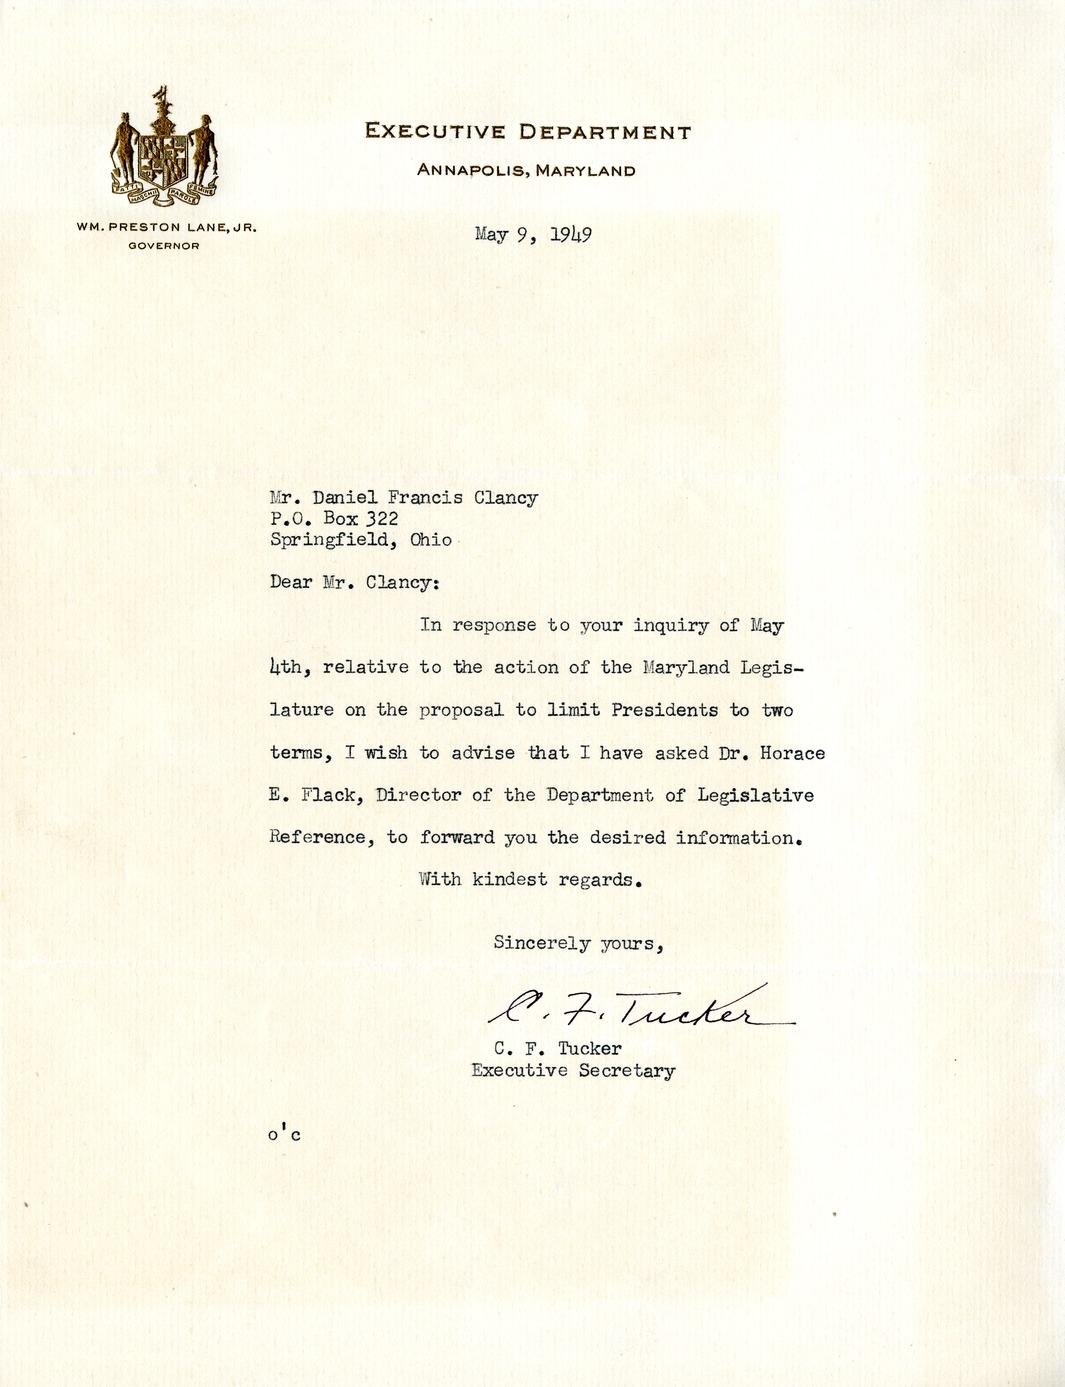 Letter from C.F. Tucker to Daniel F. Clancy